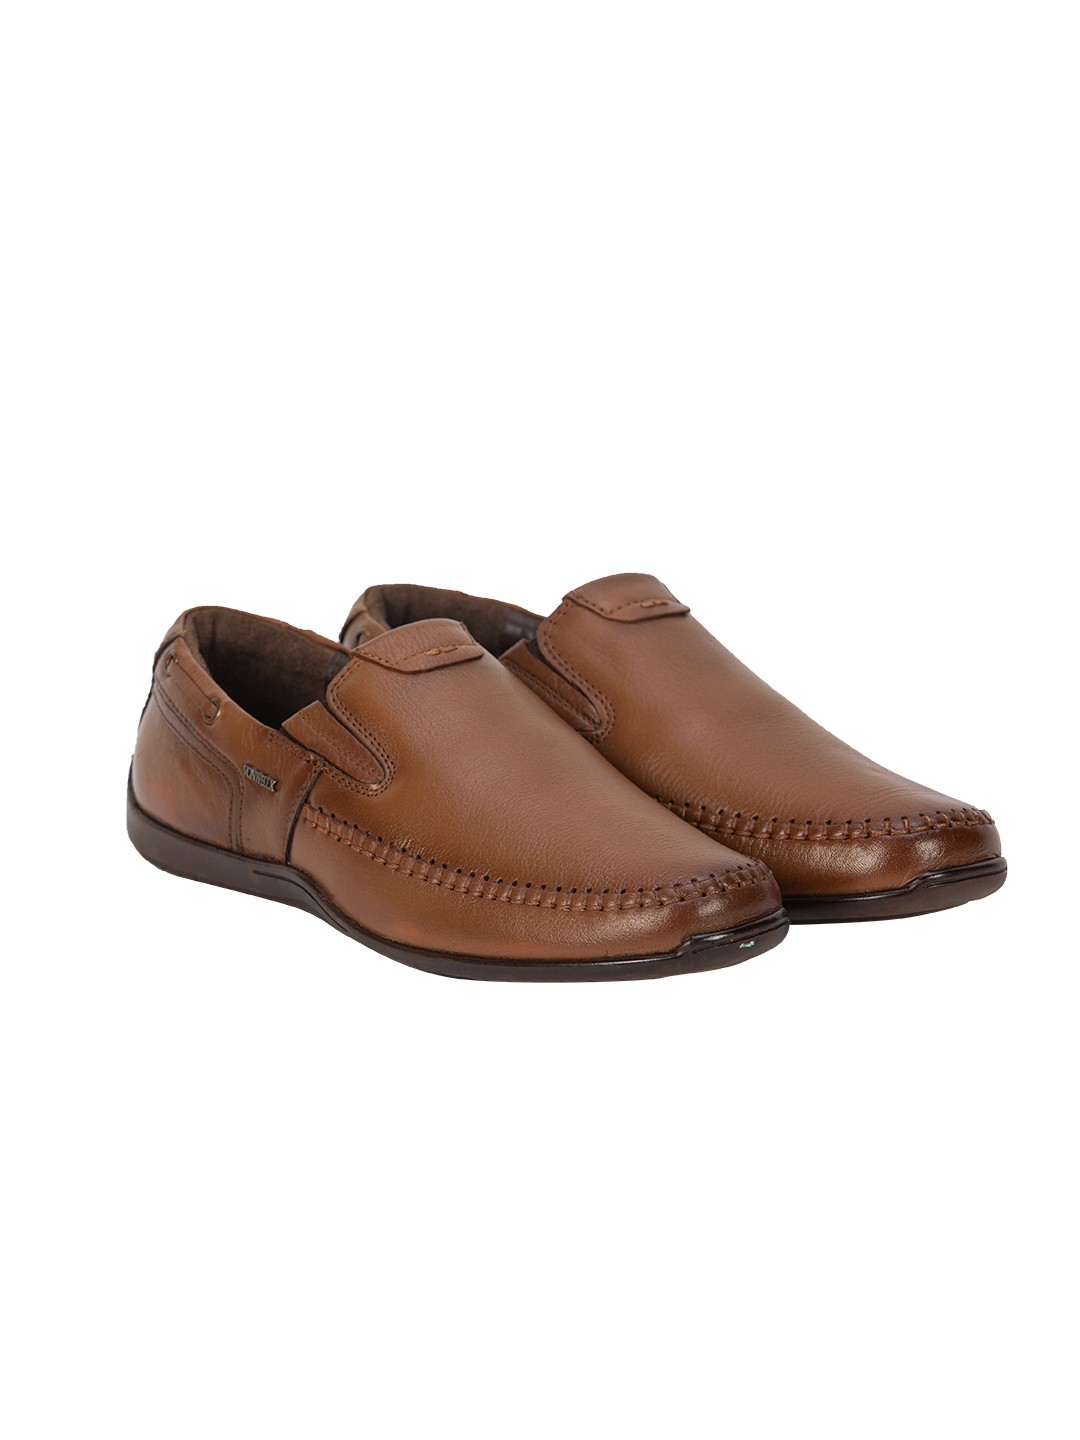 Buy Von Wellx Axel Casual Tan Shoes Online in Udaipur